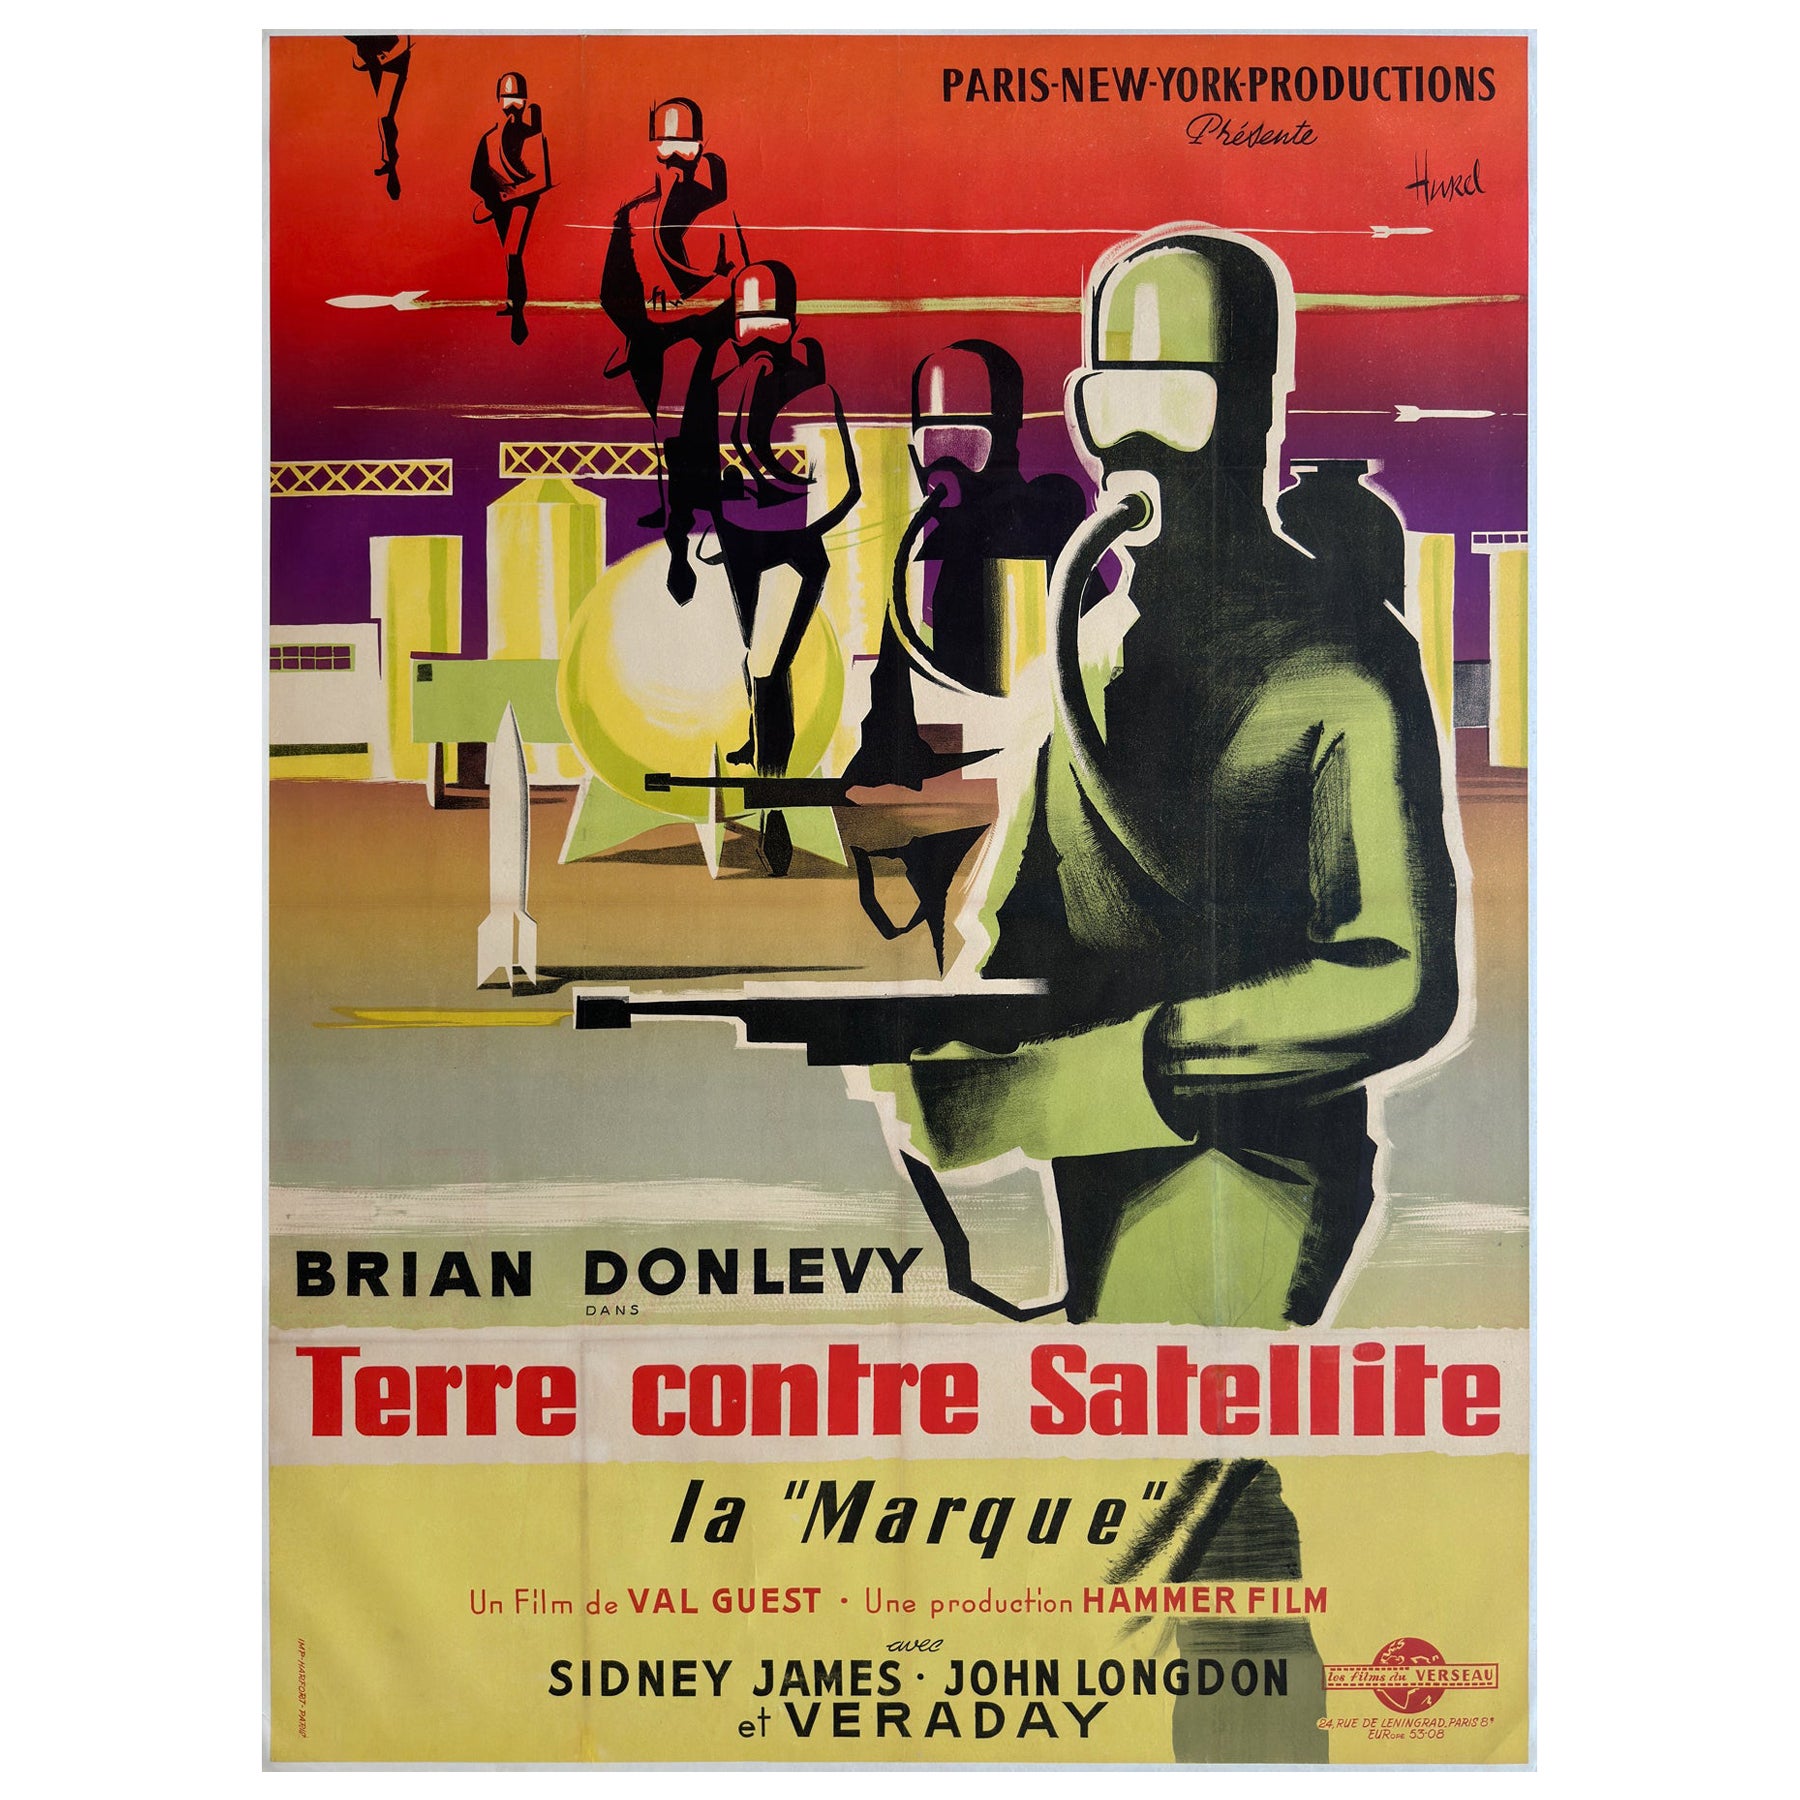 Quatermass II: Enemy from Space 1958 French Grande Film Poster, Clement Hurel For Sale